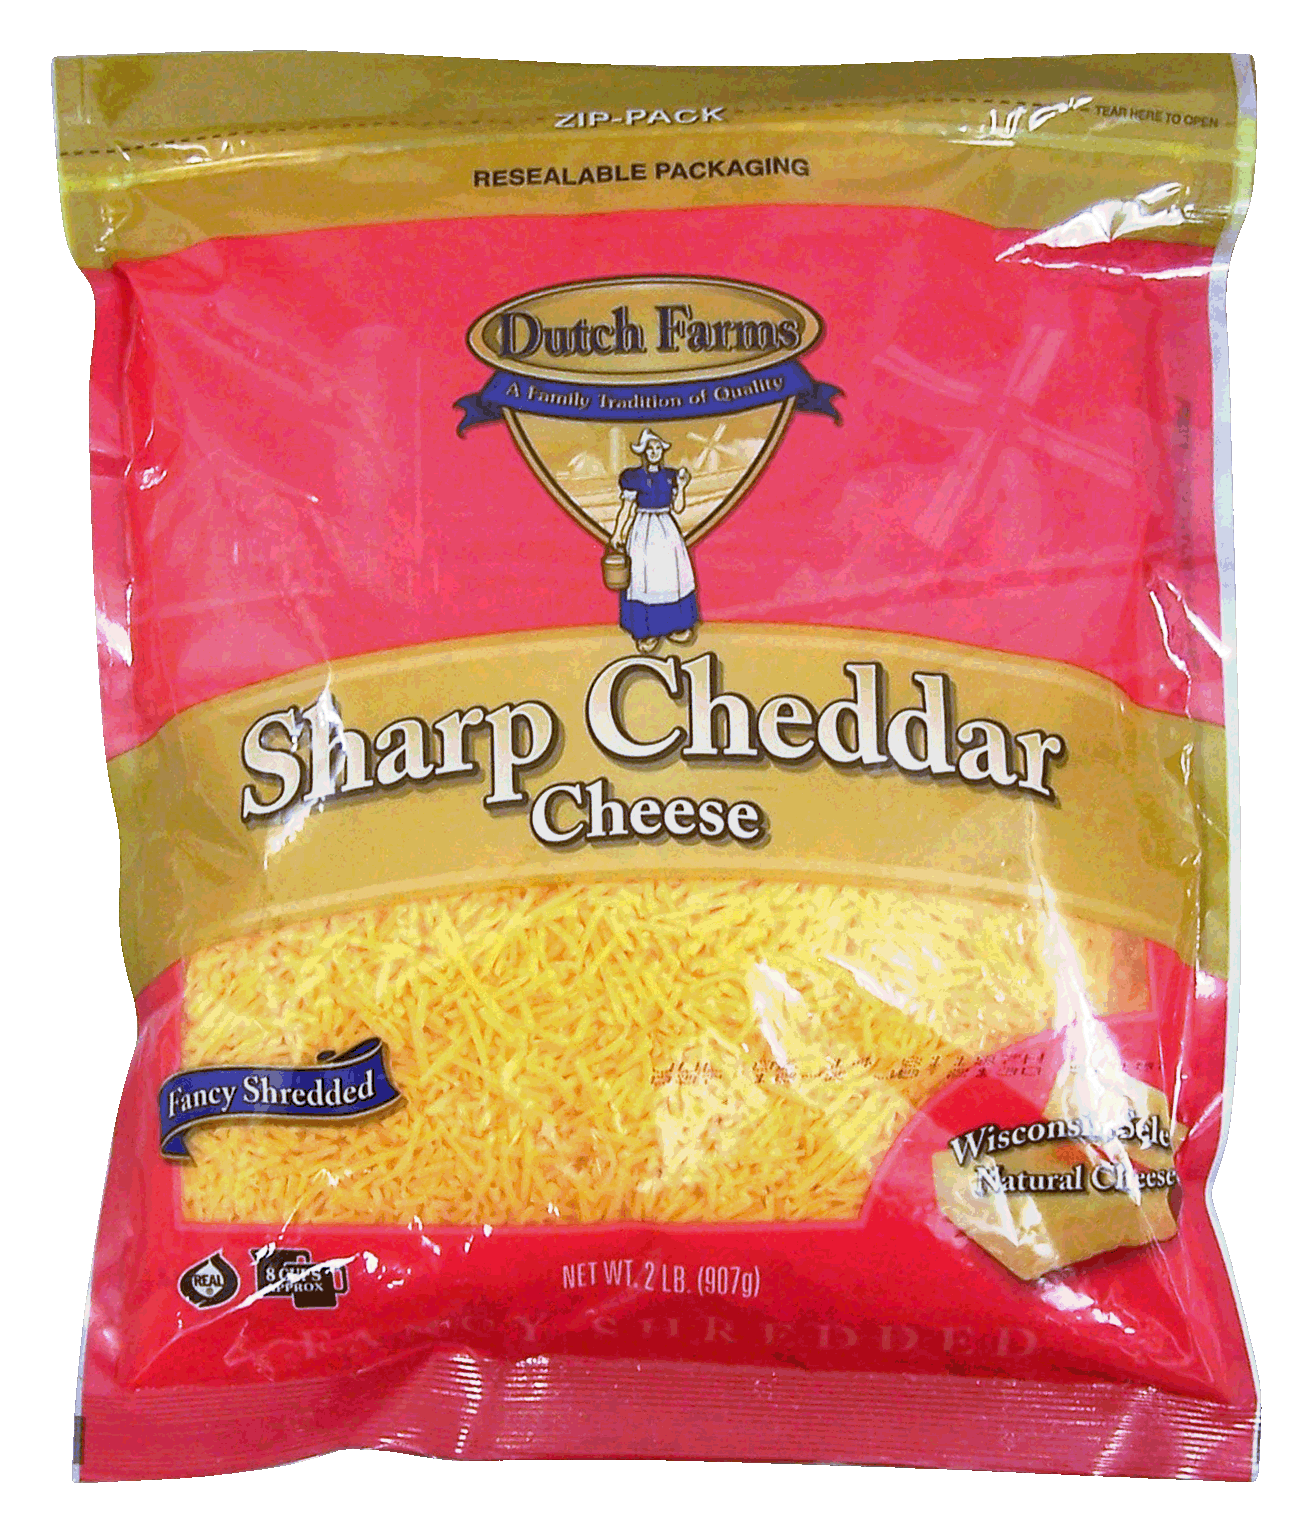 Dutch Farms  sharp cheddar cheese, fancy shredded, wisconsin select natural cheese Full-Size Picture